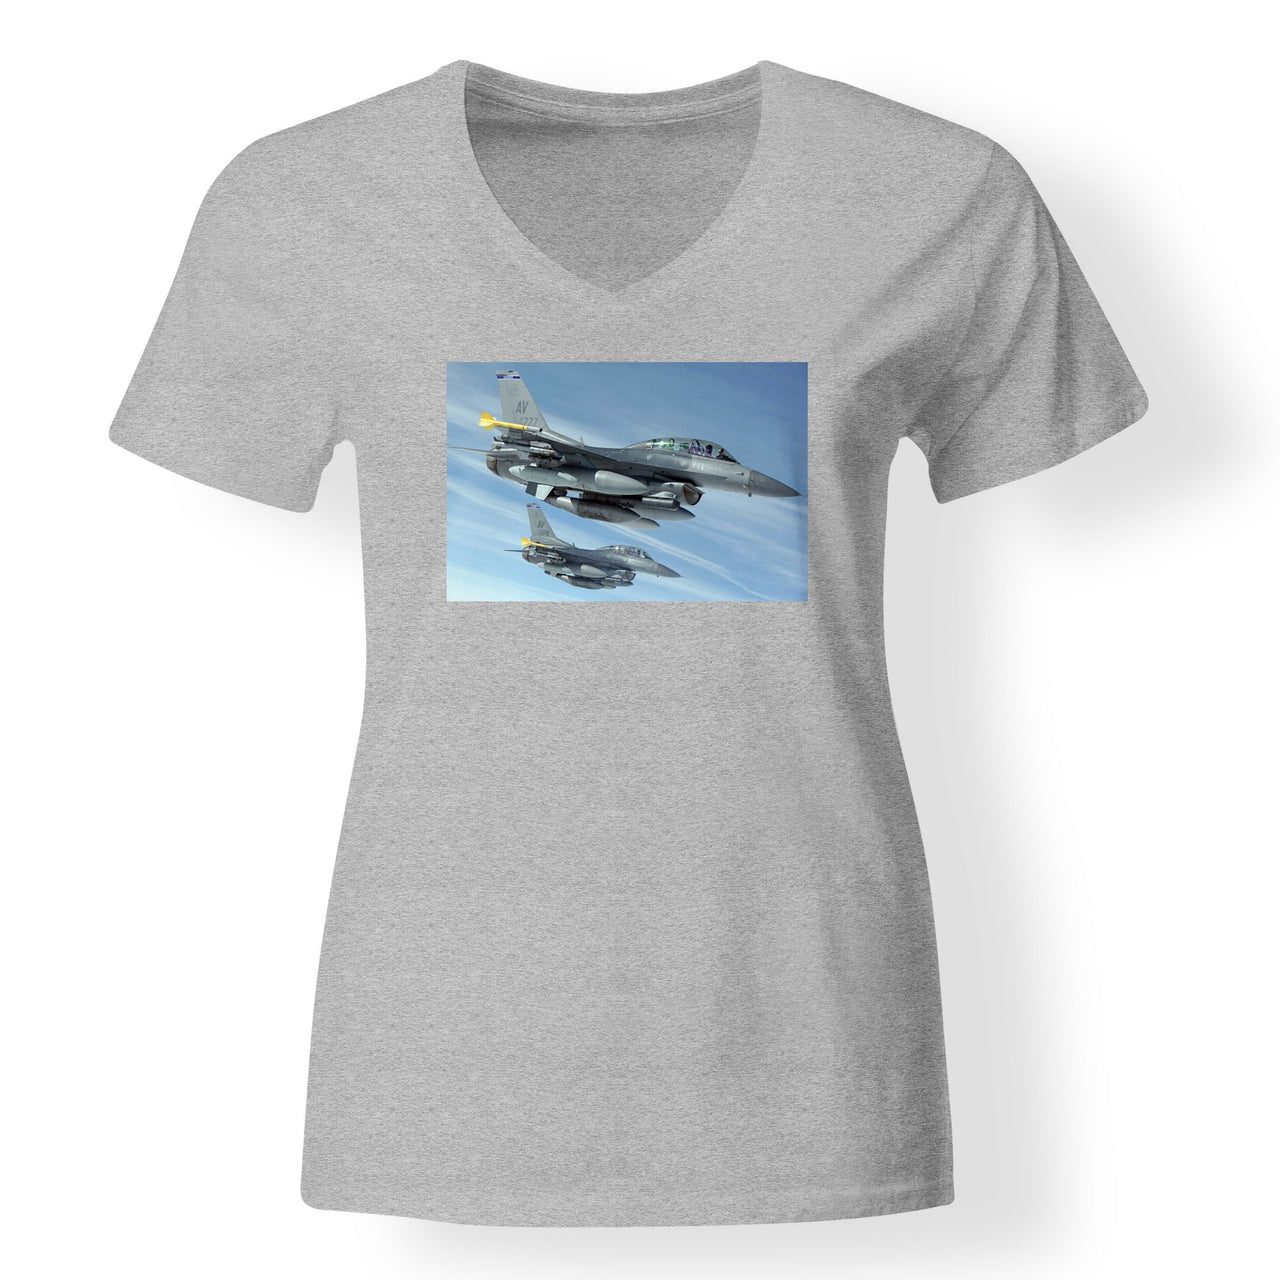 Two Fighting Falcon Designed V-Neck T-Shirts